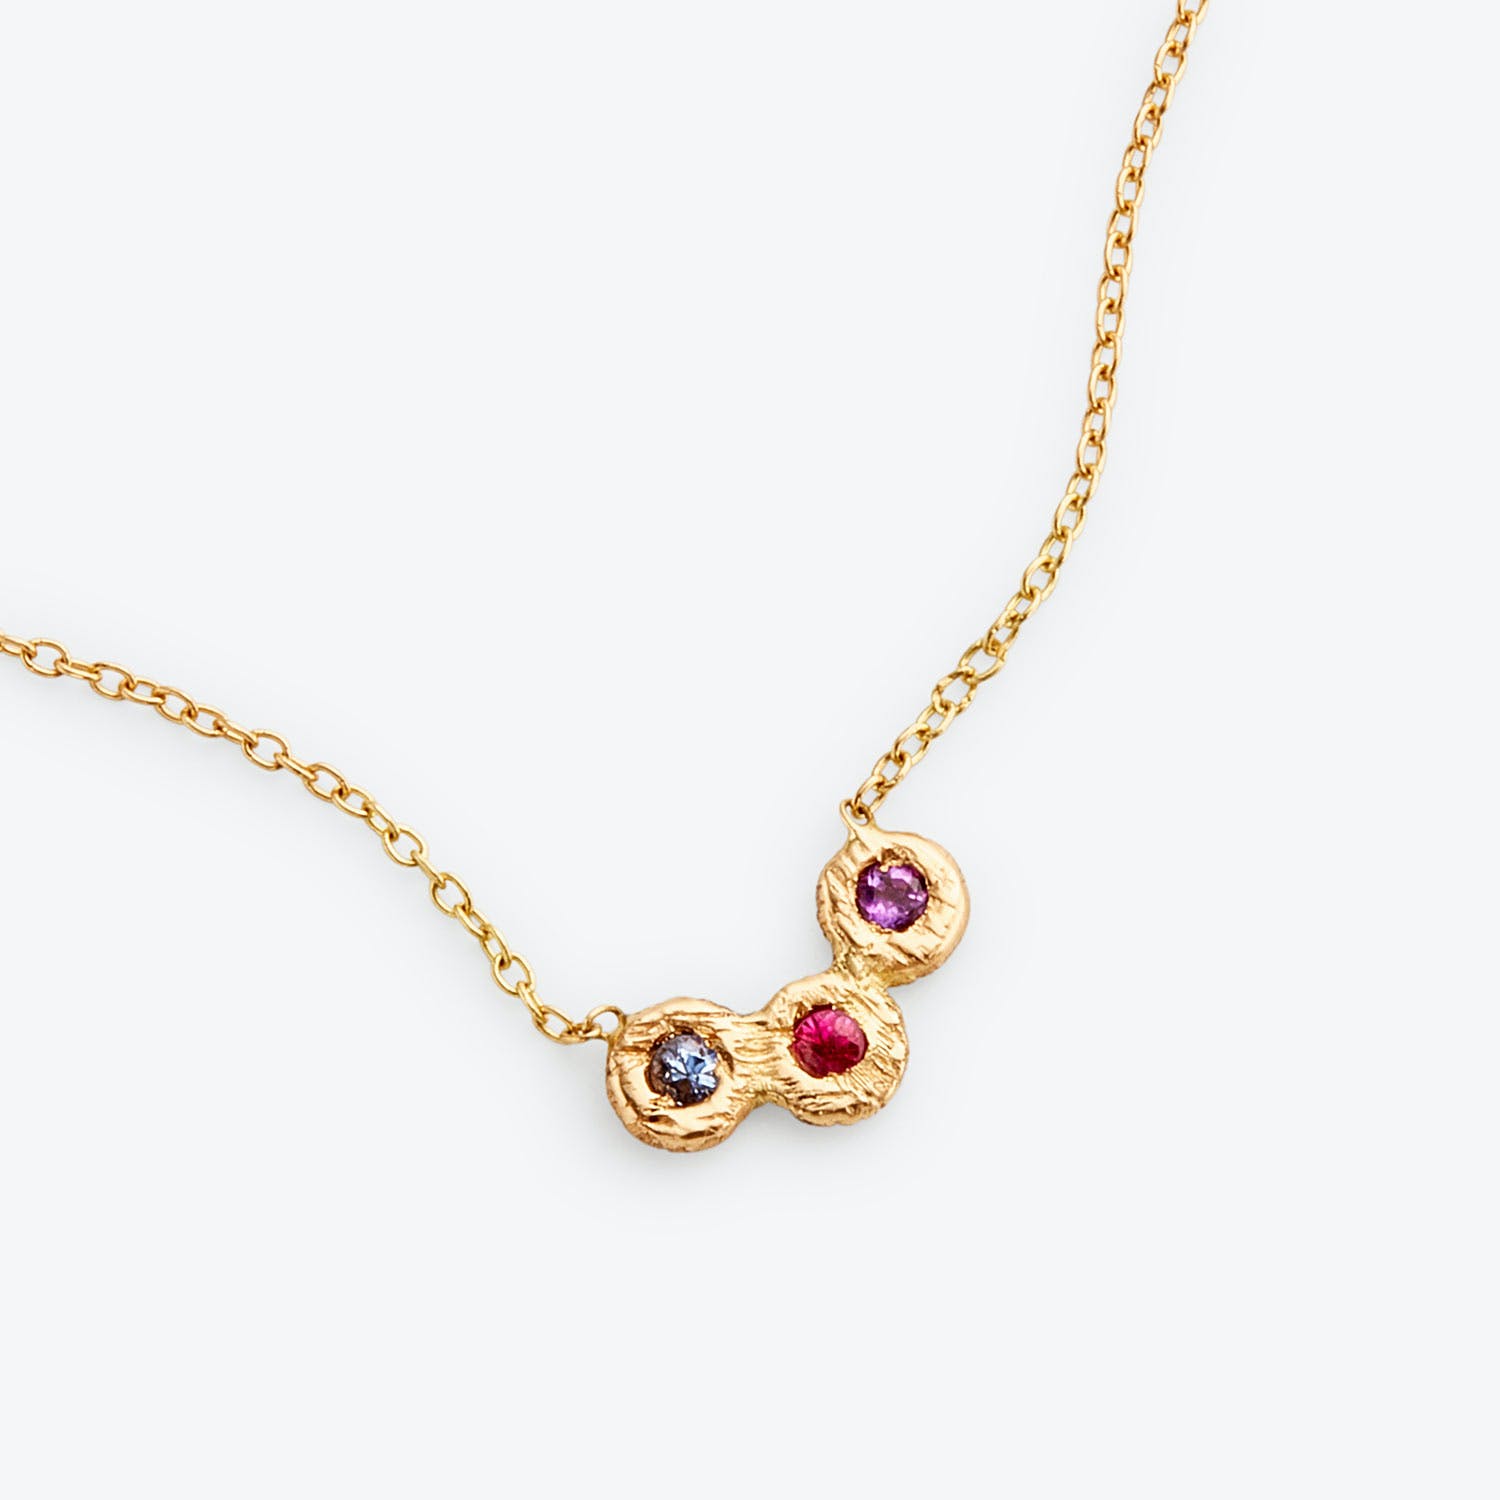 Delicate gold necklace with textured pendant and colorful gemstones.